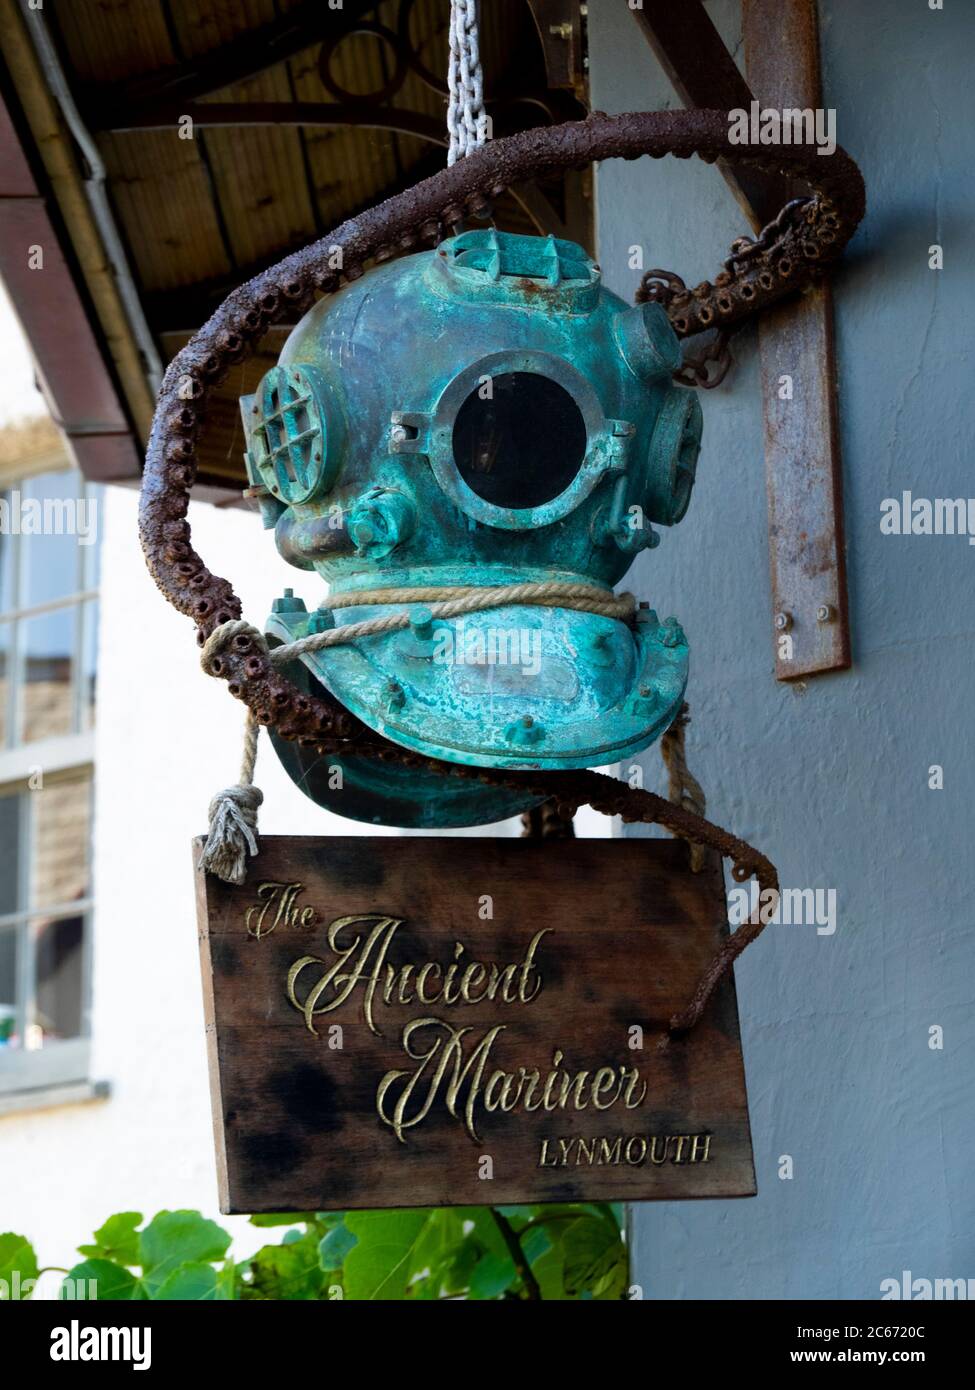 The Ancient Mariner pub sign, Lynmouth, Exmoor, Devon, UK Stock Photo